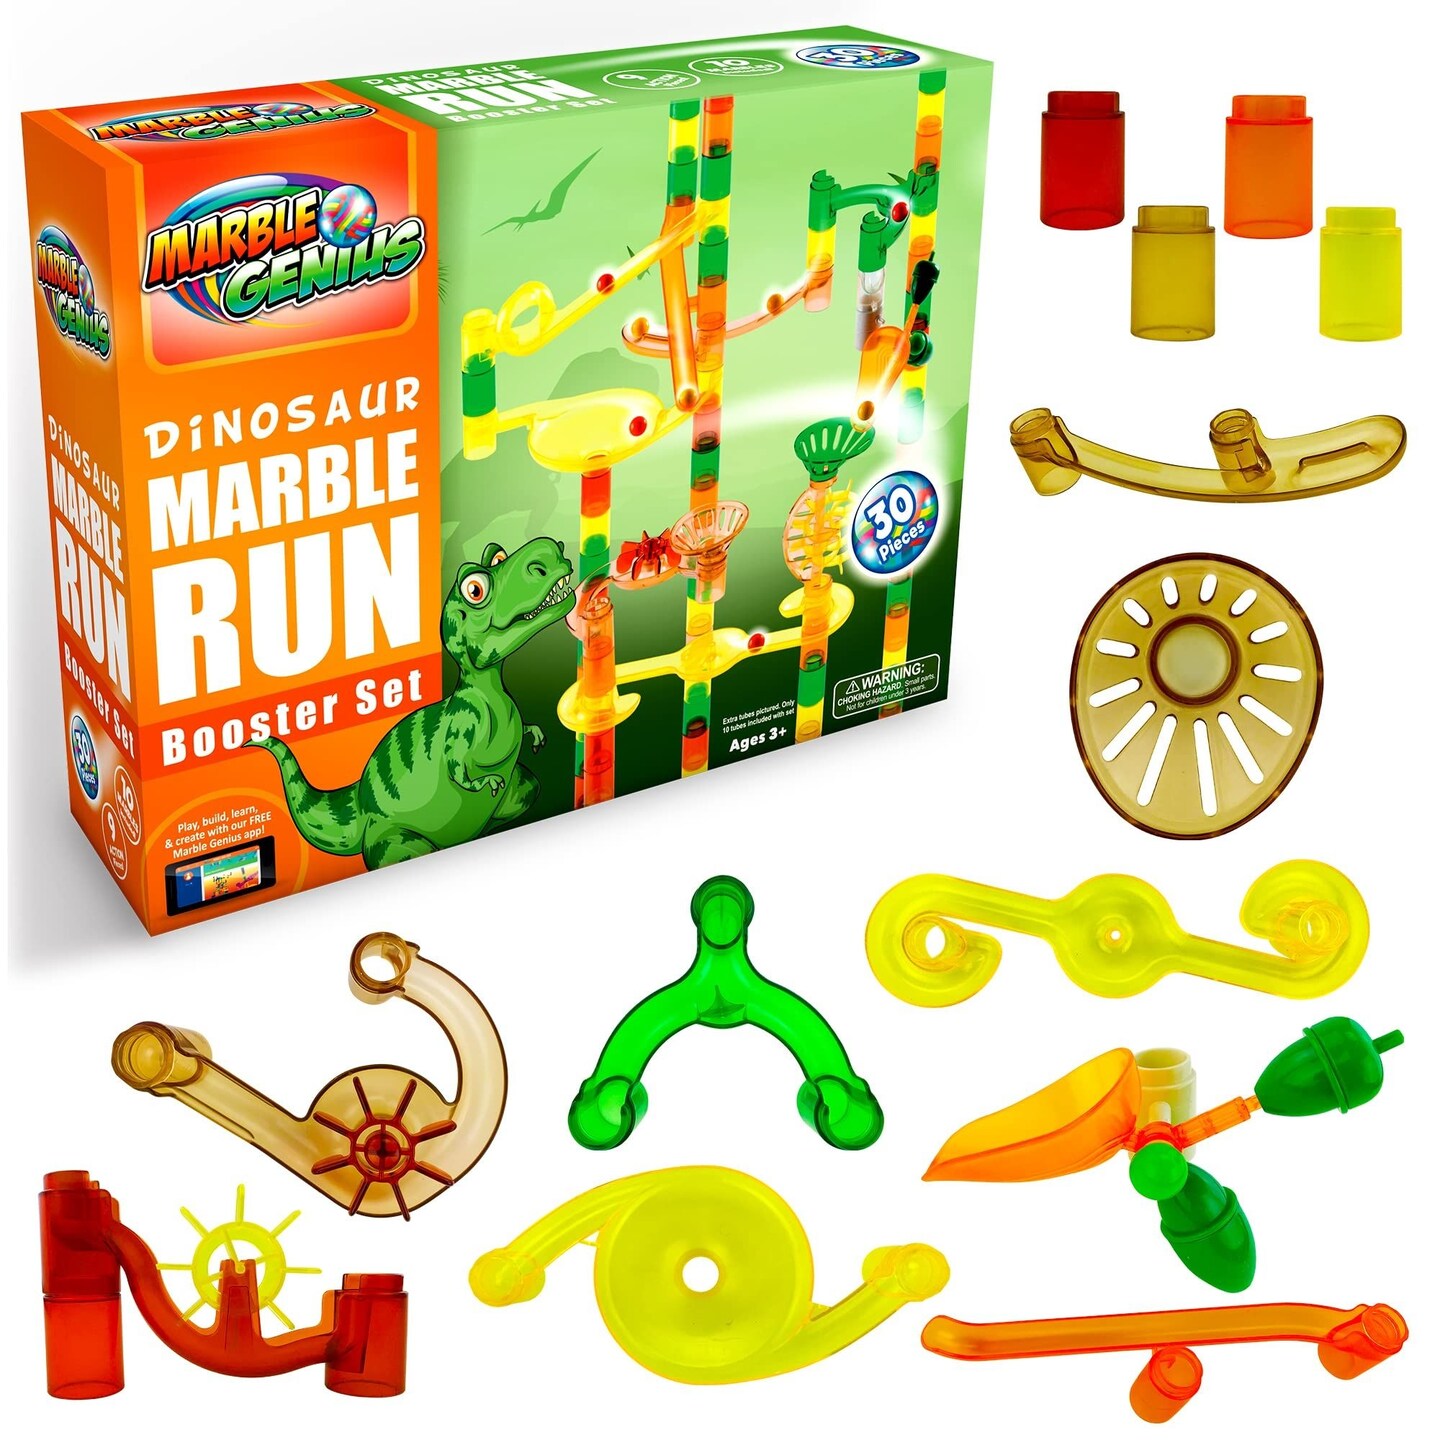 Marble Genius Marble Run Booster Set - 30 Pieces Total (10 Action Pieces Included), Construction Building Blocks Toys for Ages 3 and Above, with Instruction App Access, Add-On Set, Dinosaur